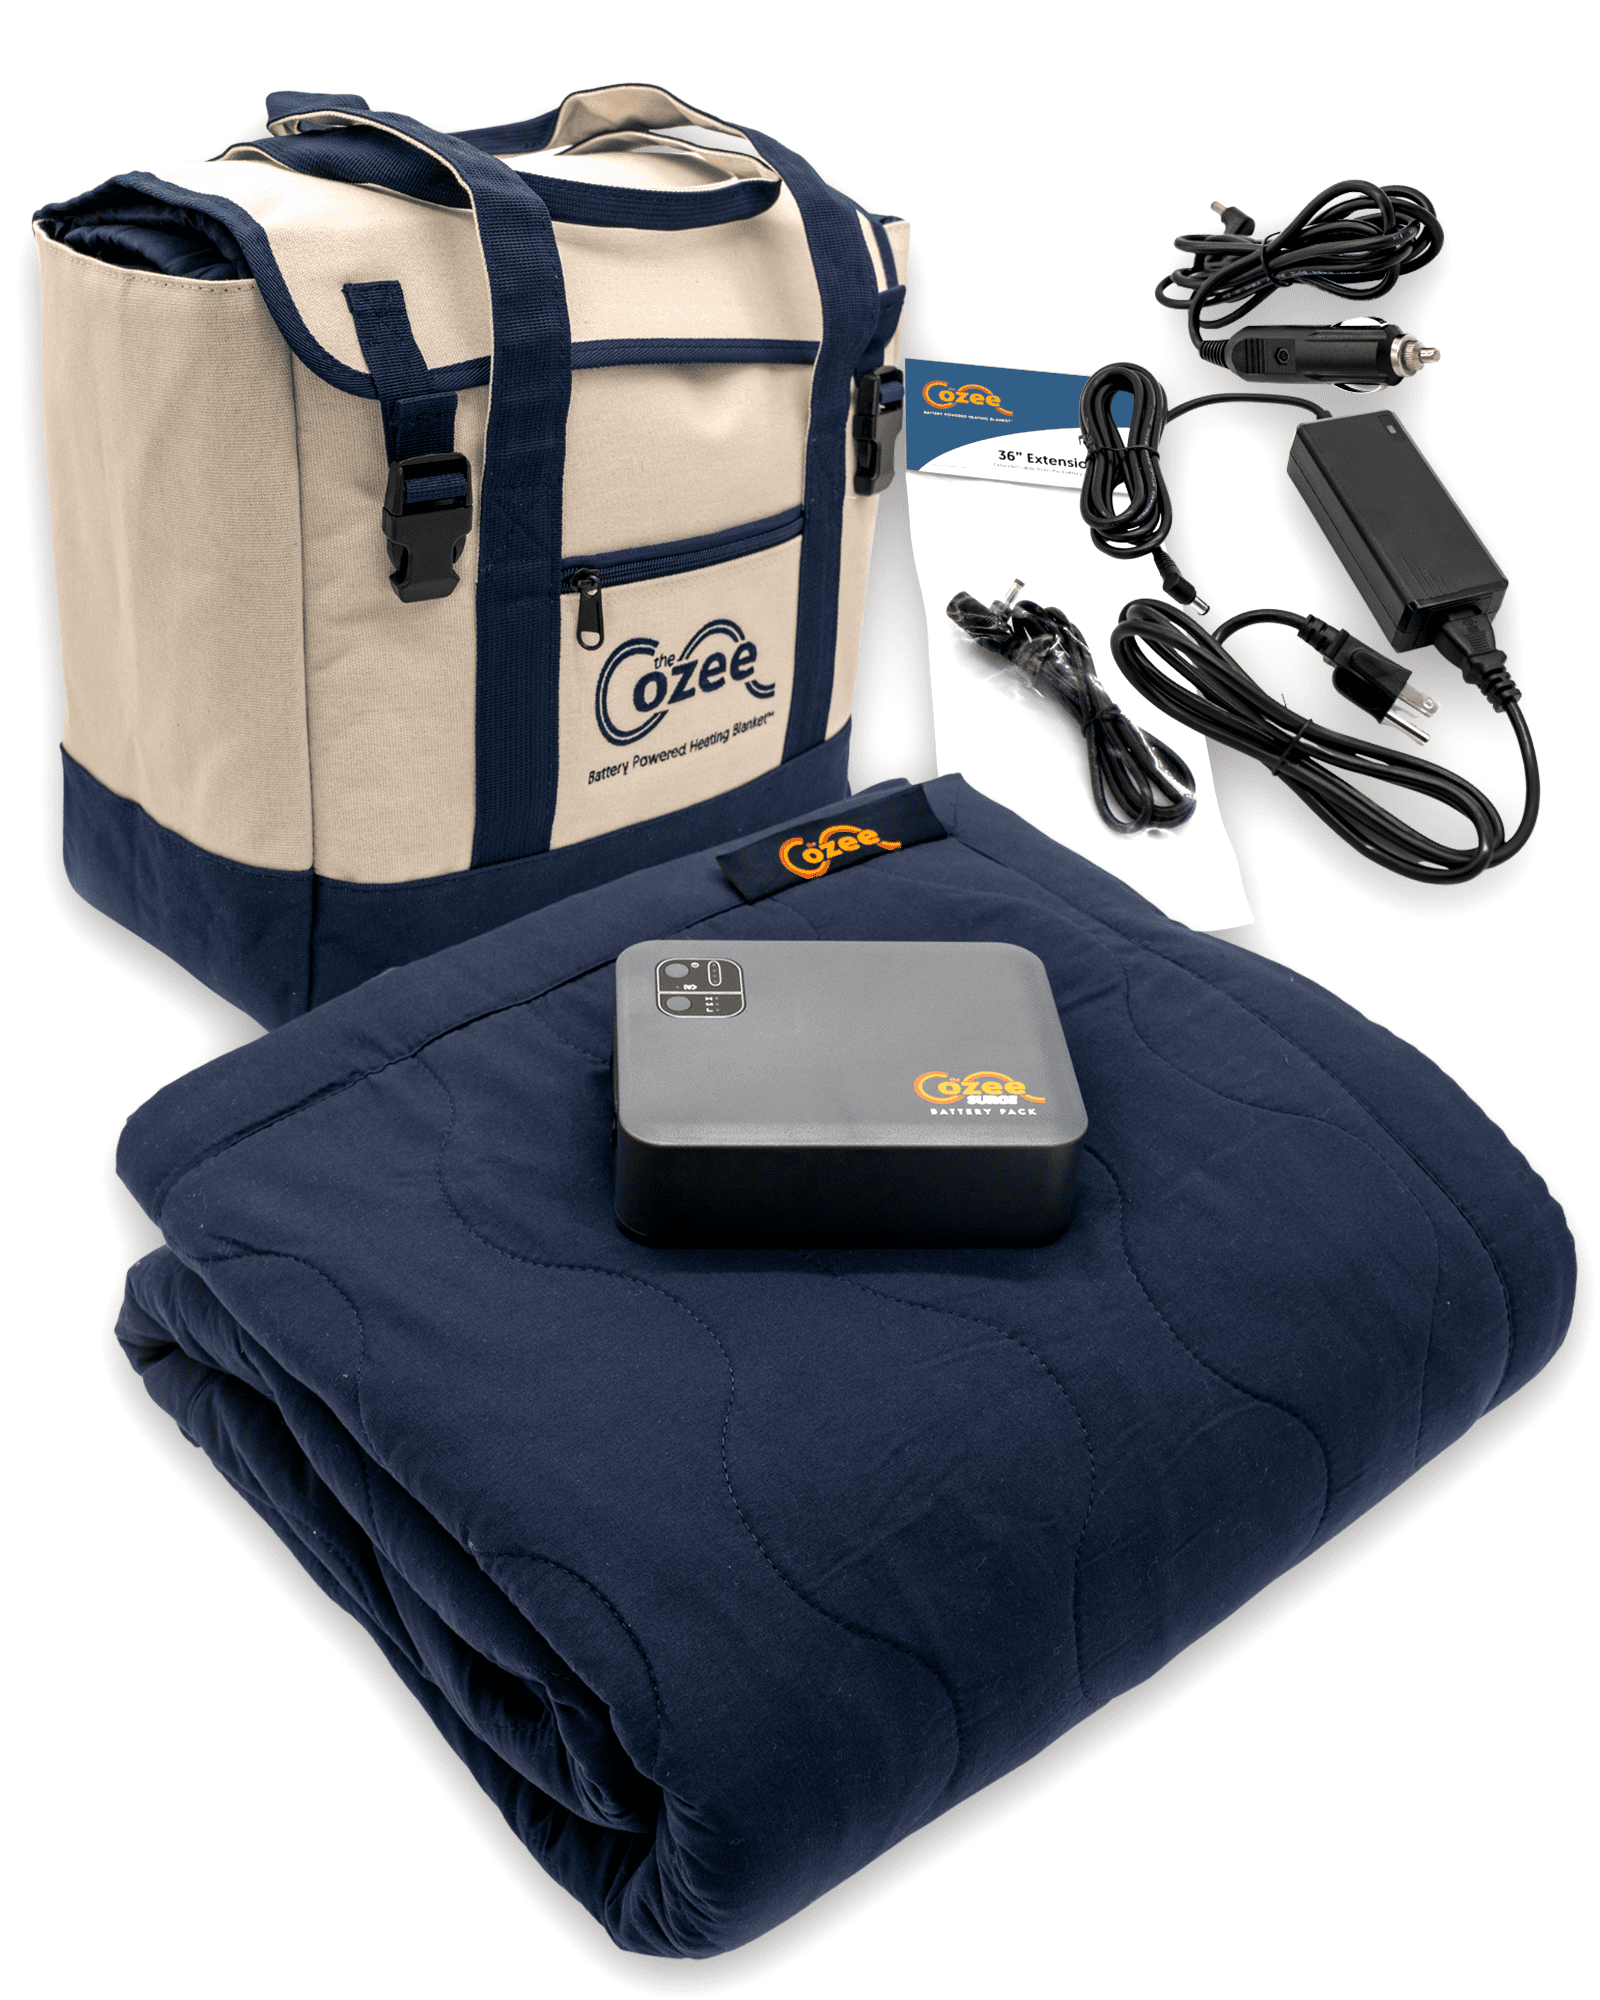 Cozee Electric Blanket Surge Battery Operated Throw Blanket Plus Tote